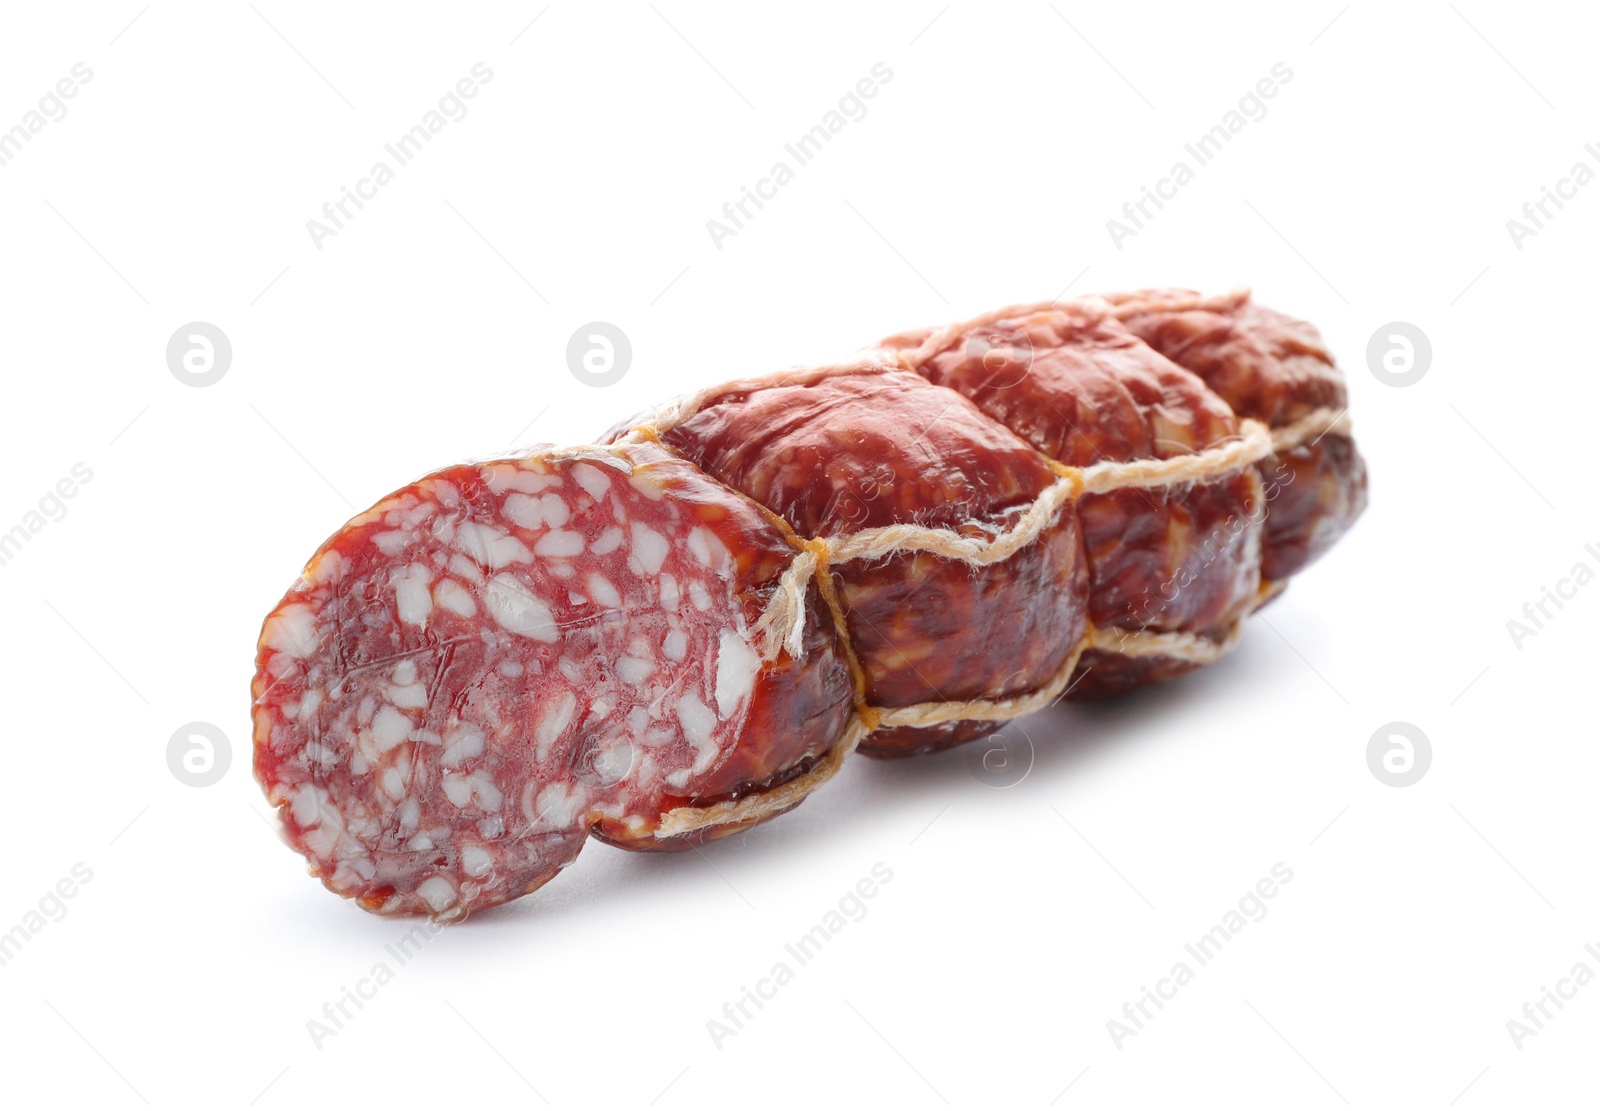 Photo of Tasty cut salami on white background. Meat product